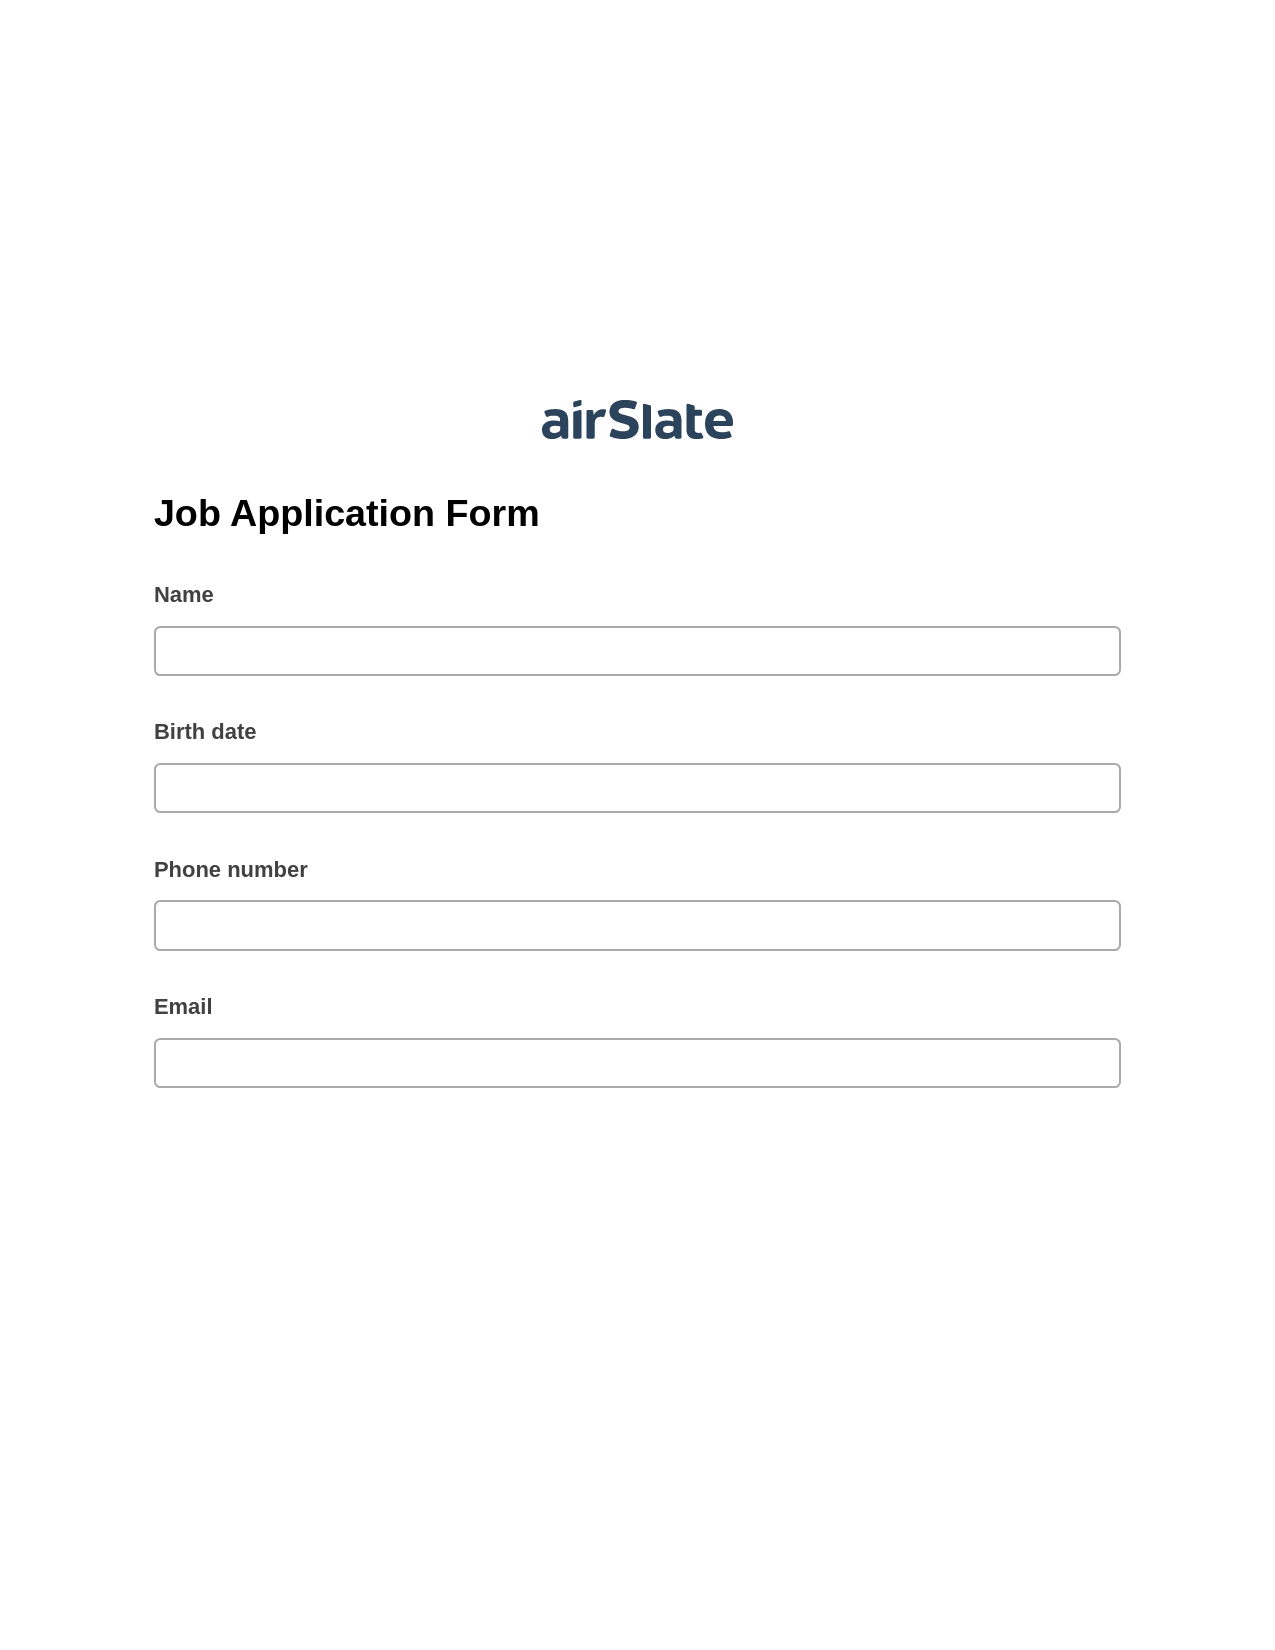 Job Application Form Pre-fill from Excel Spreadsheet Dropdown Options Bot, Create NetSuite Records Bot, Export to NetSuite Record Bot